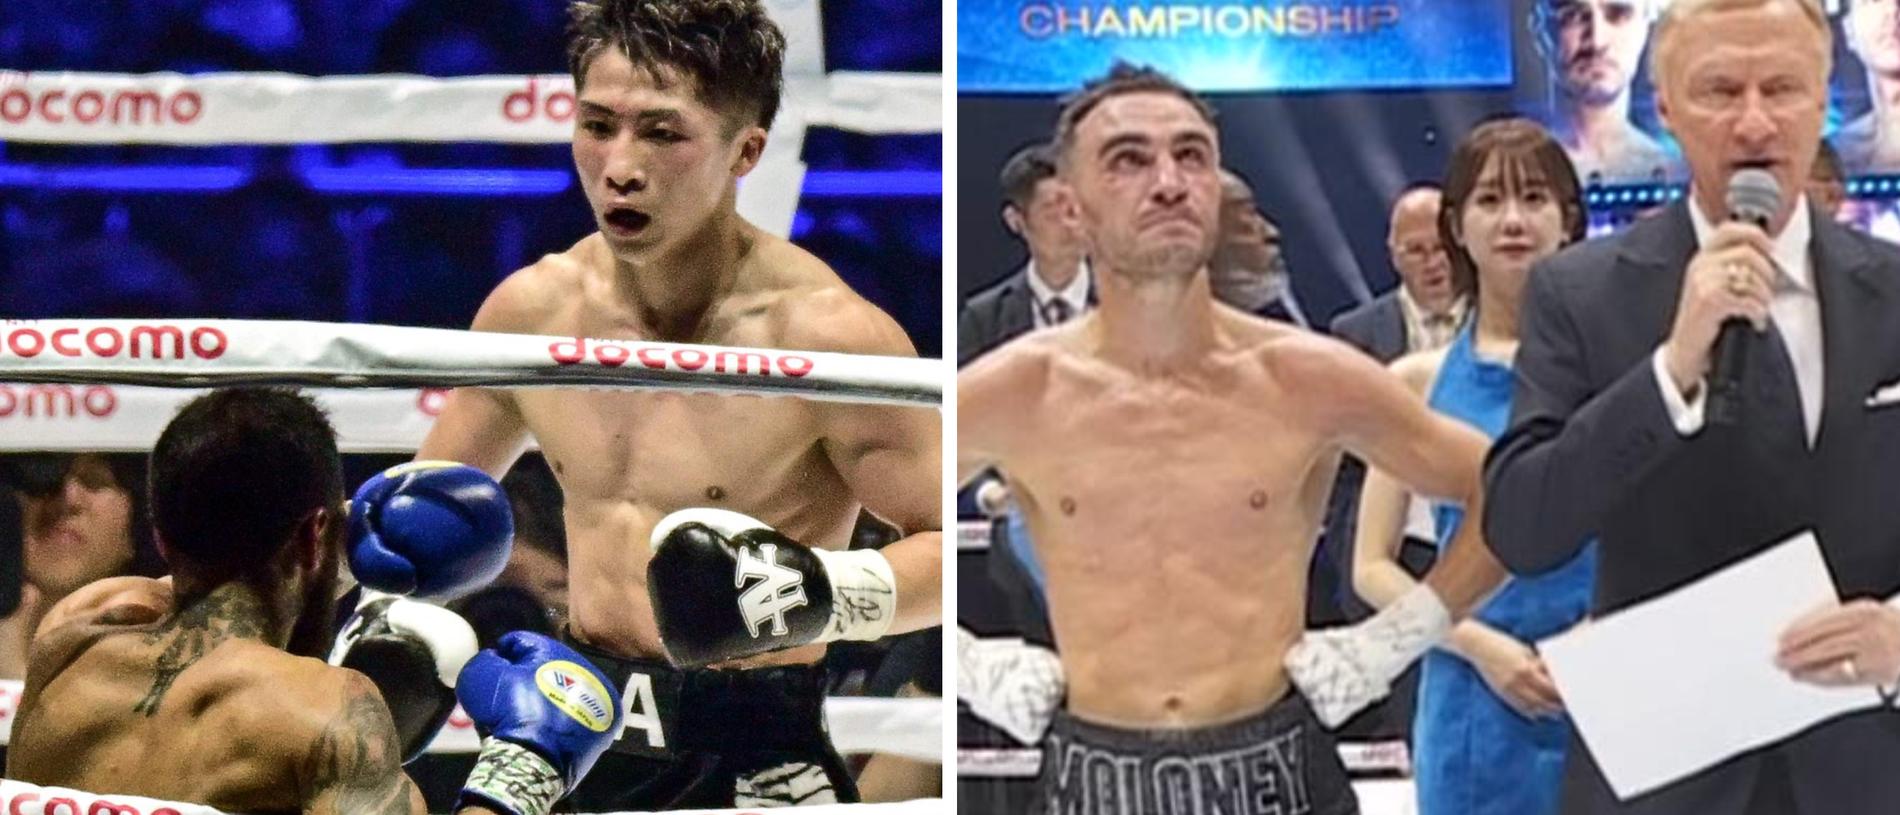 Inoue retained but Moloney lost.